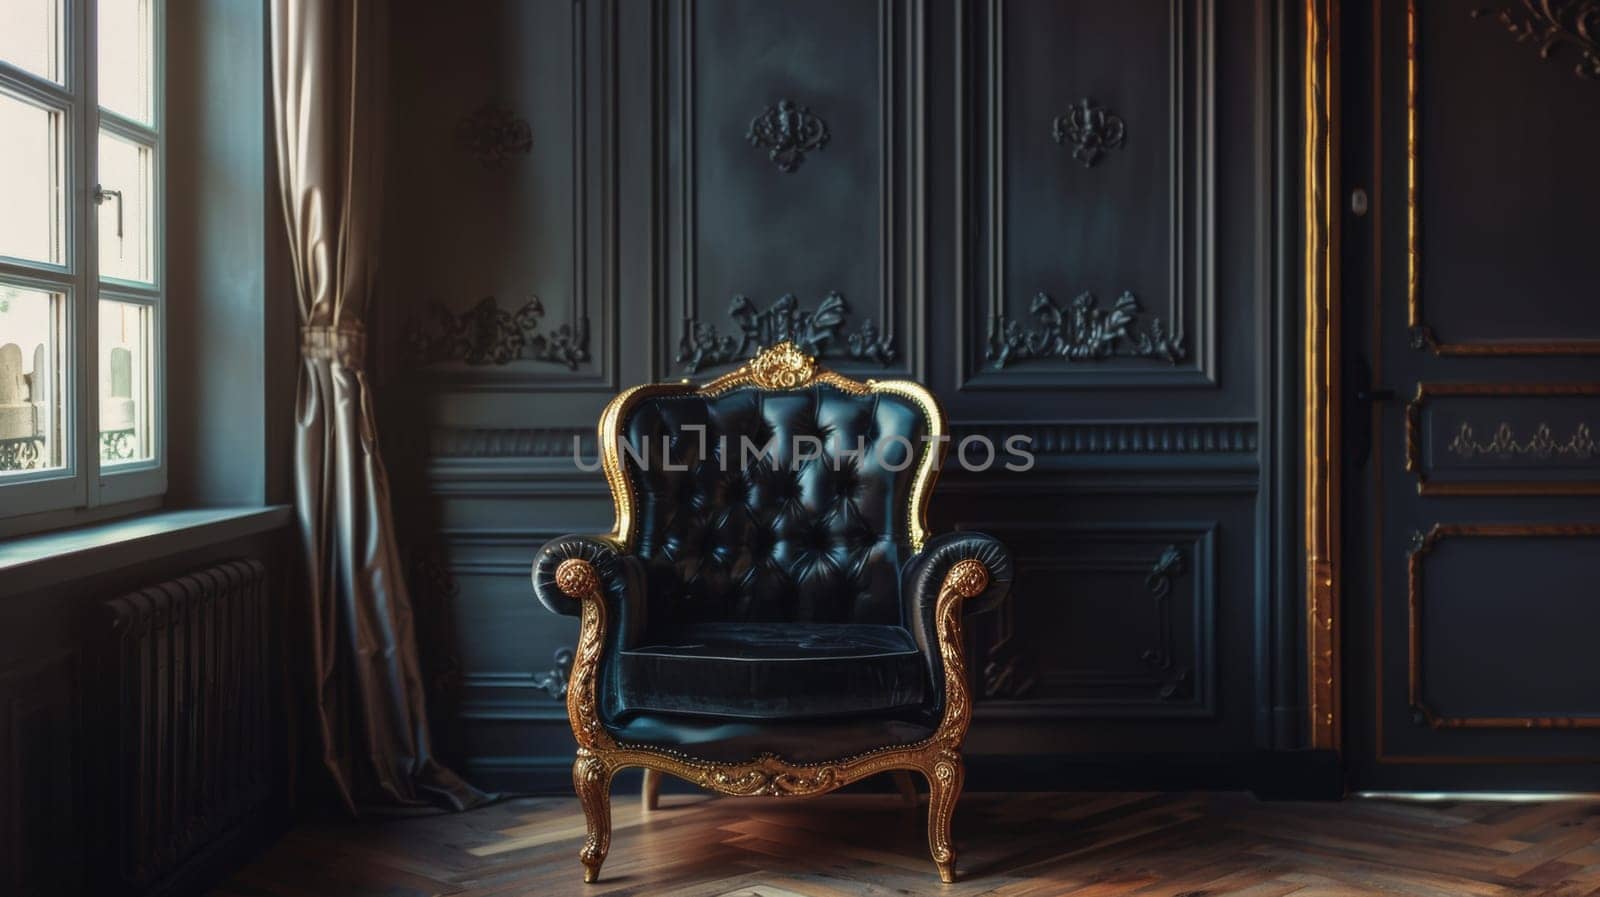 A black chair sitting in front of a window with gold trim